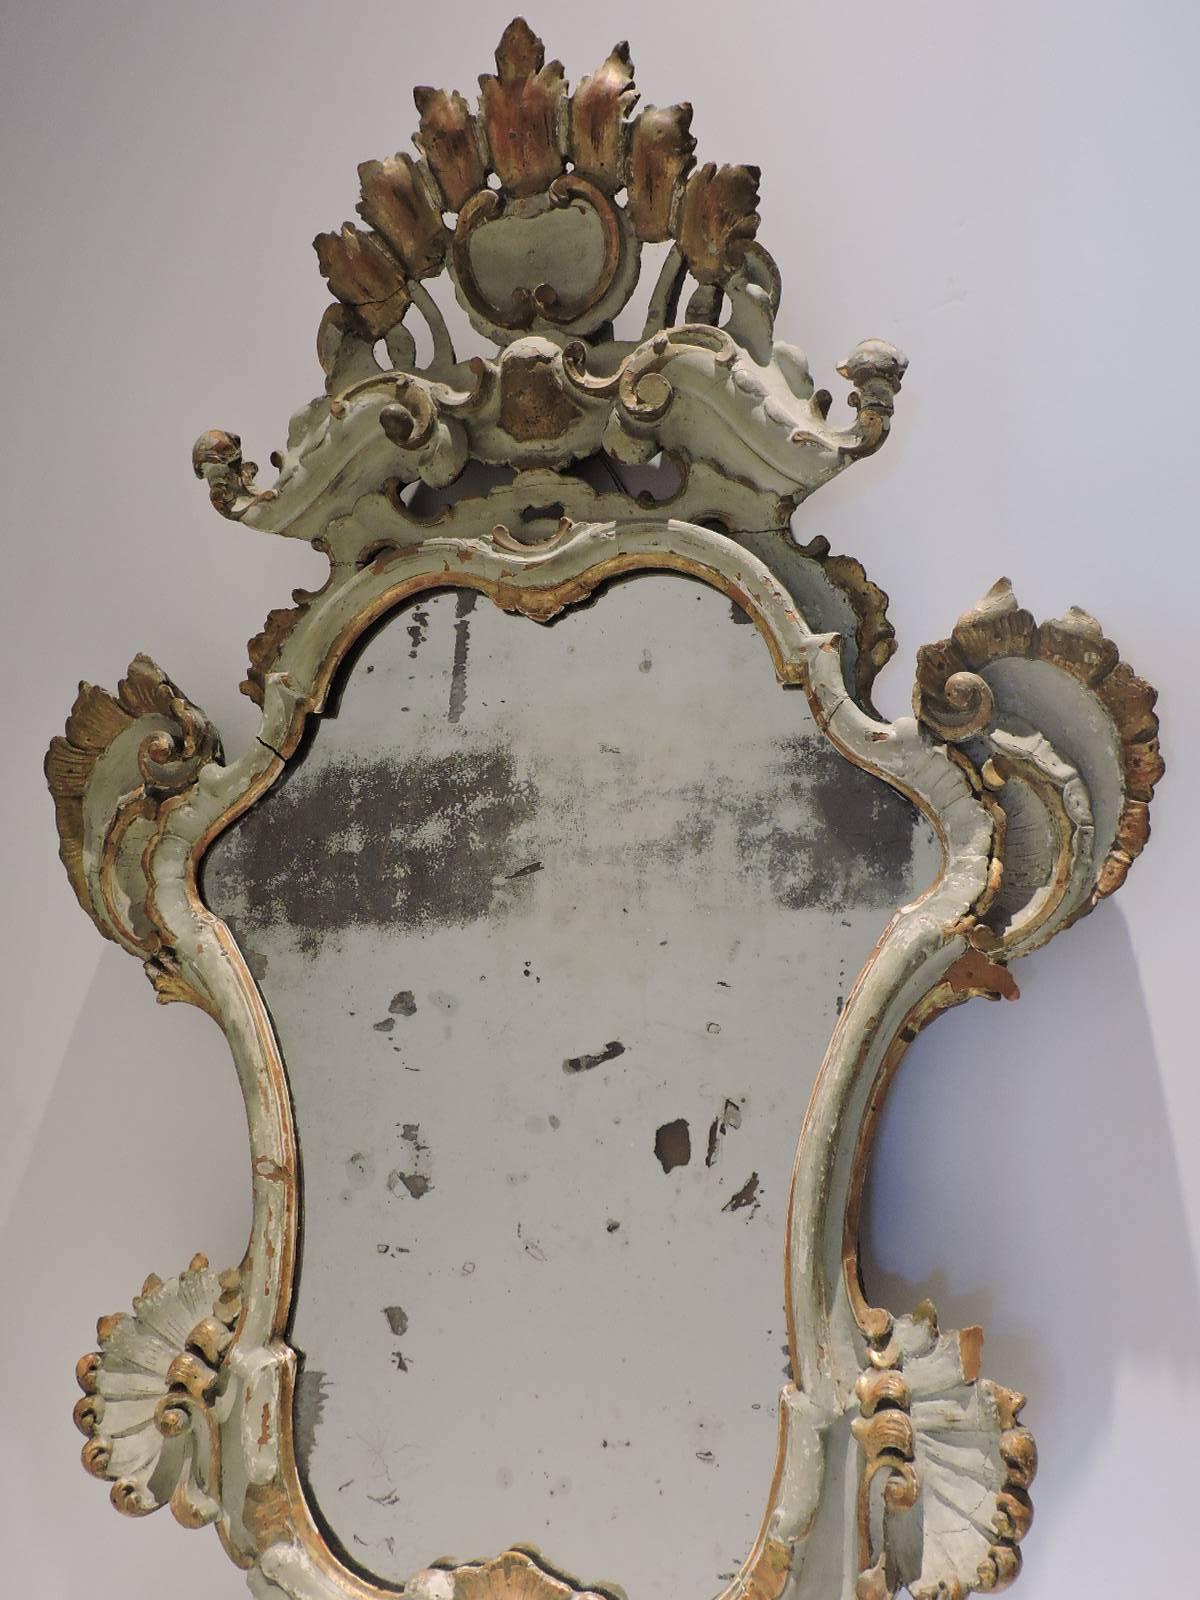 A very boldly carved antique Venetian Rococo mirror in older very pale soft gray to cream white painted surface with beautifully aged old gilding and scattered areas of loss to wood. The antique mirror glass with lots of oxidation and some loss to